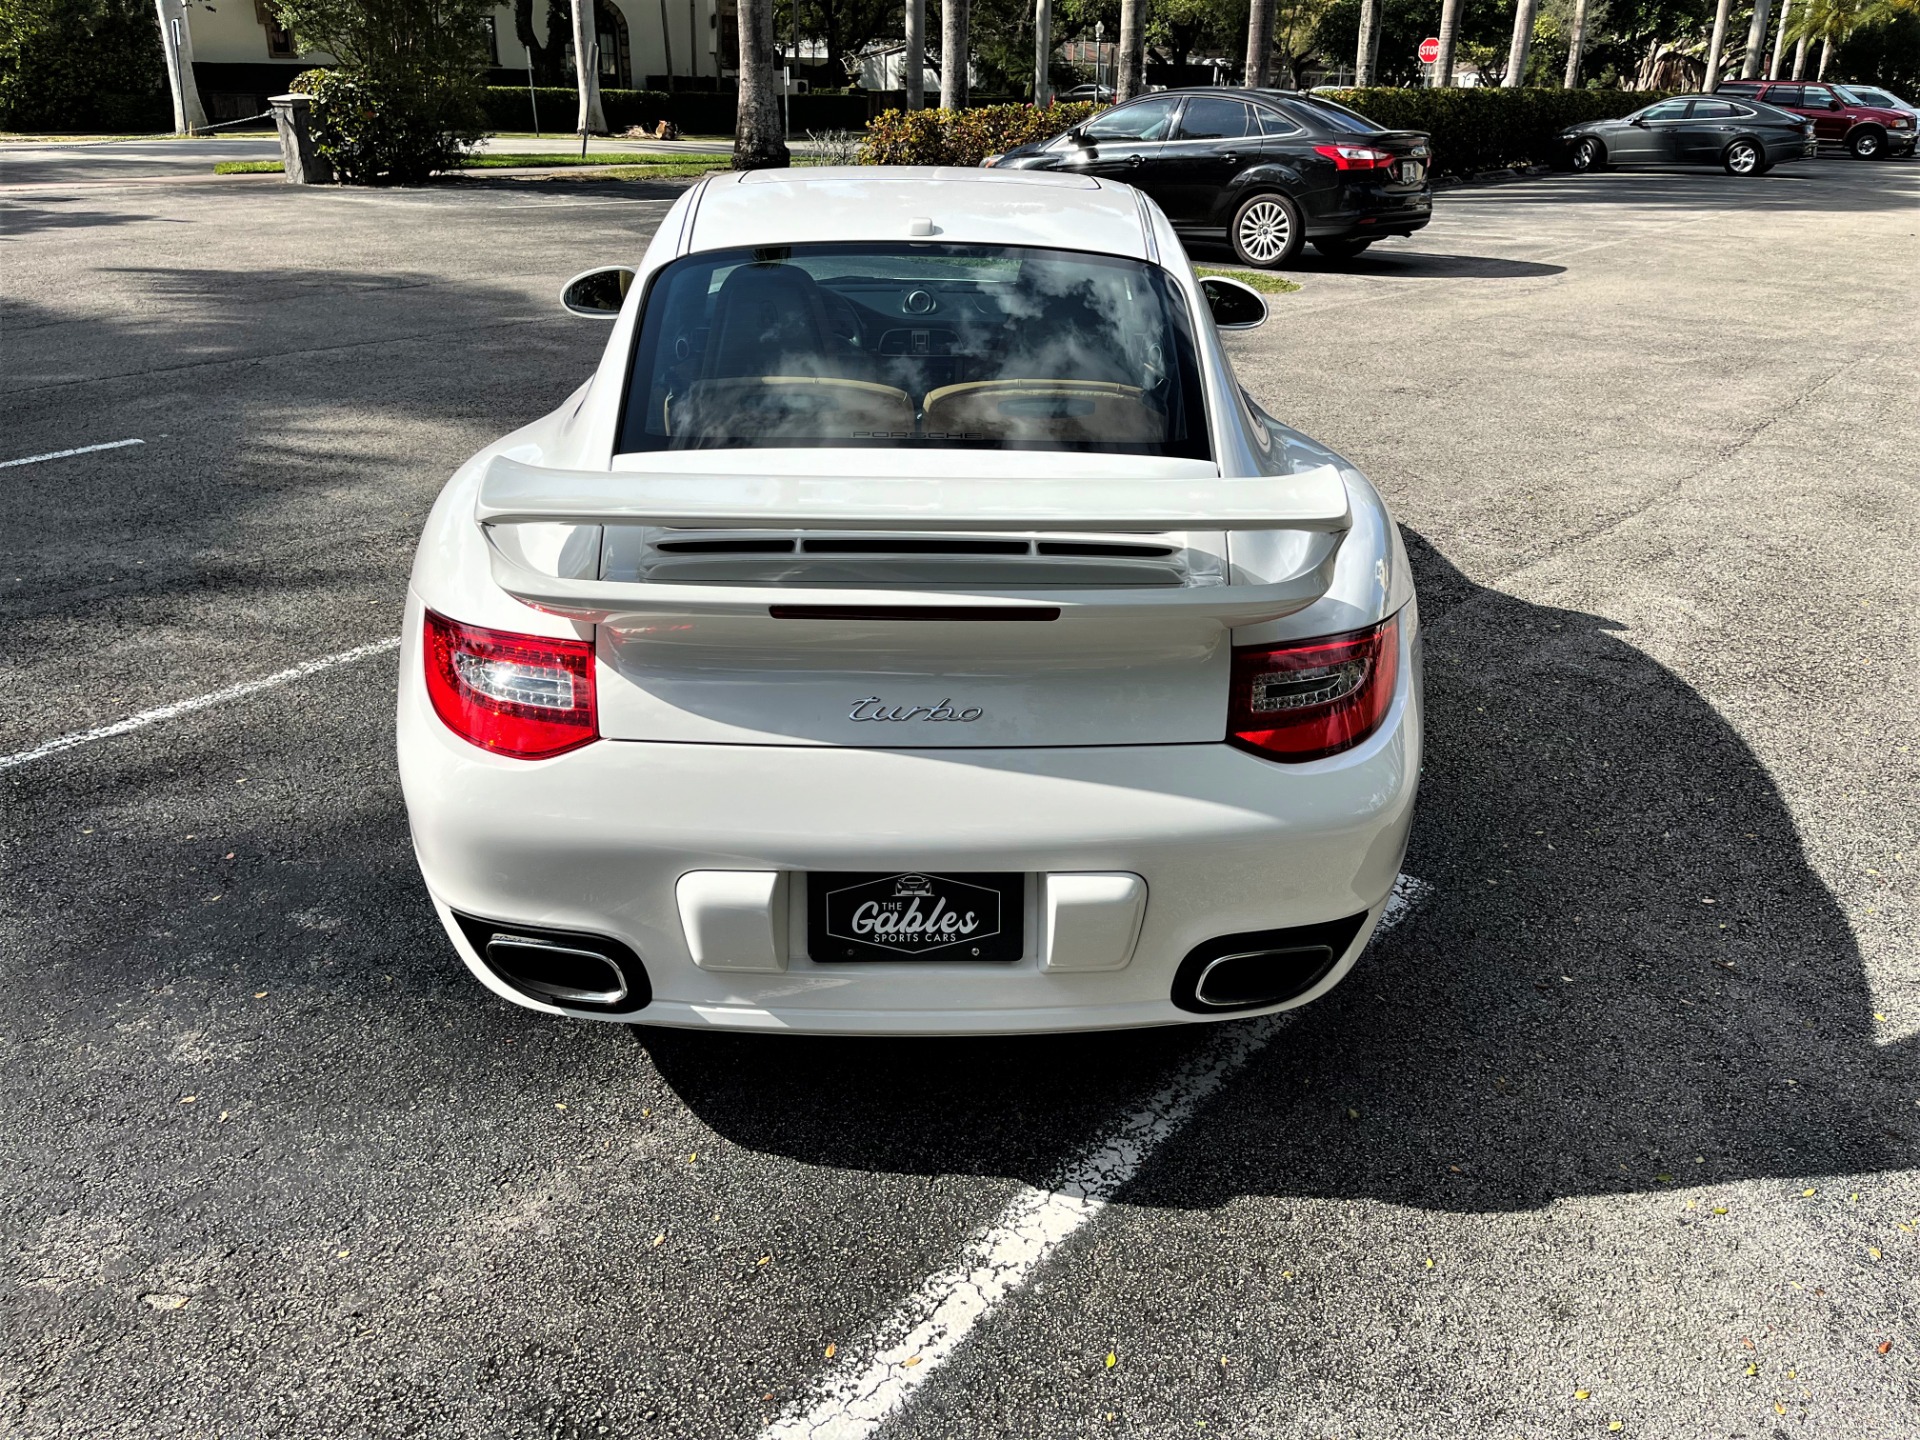 Used 2010 Porsche 911 Turbo for sale Sold at The Gables Sports Cars in Miami FL 33146 4